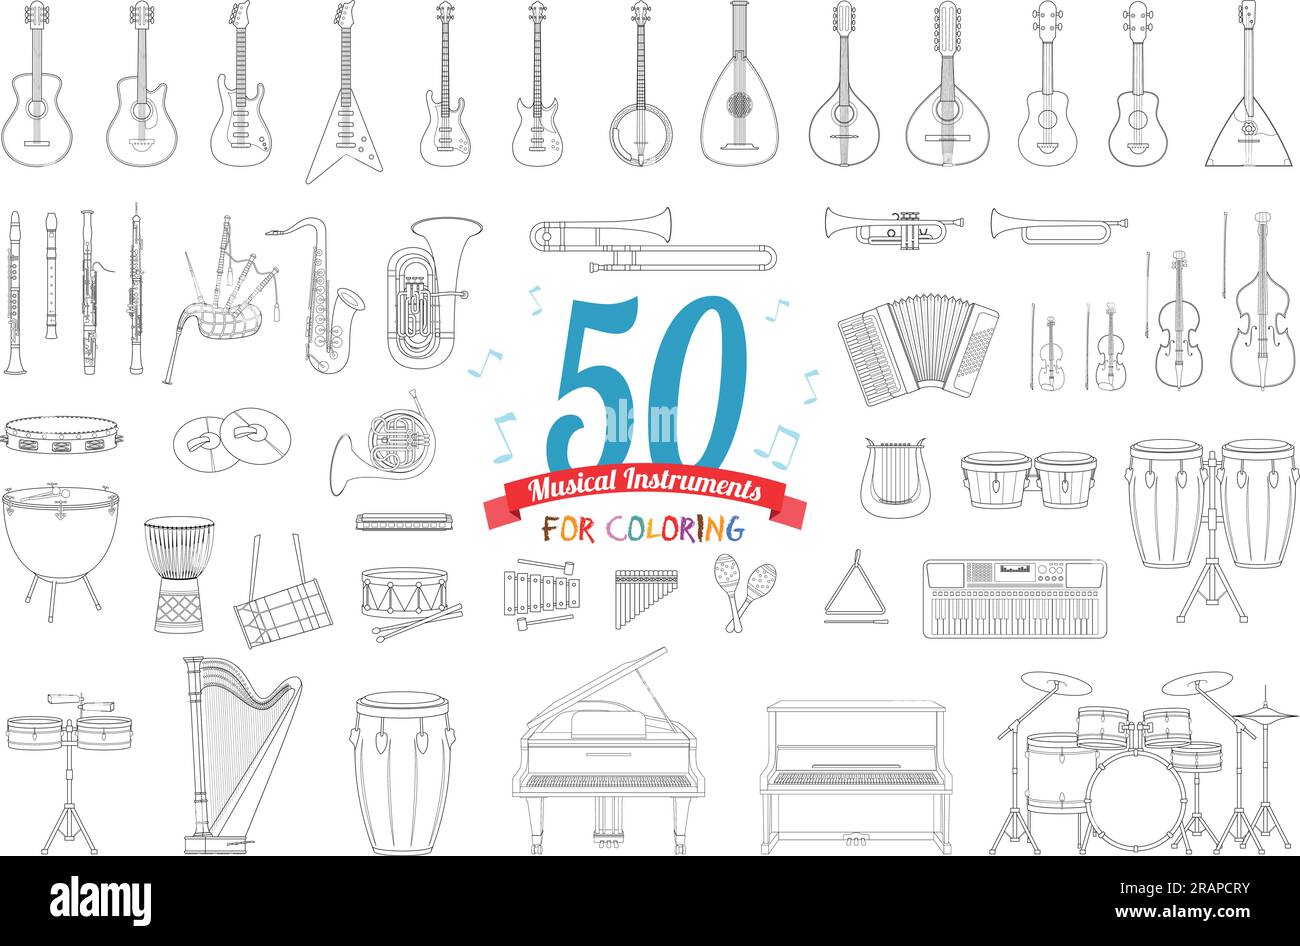 Vector illustration set of 50 musical instruments for coloring in cartoon style isolated on white background Stock Vector